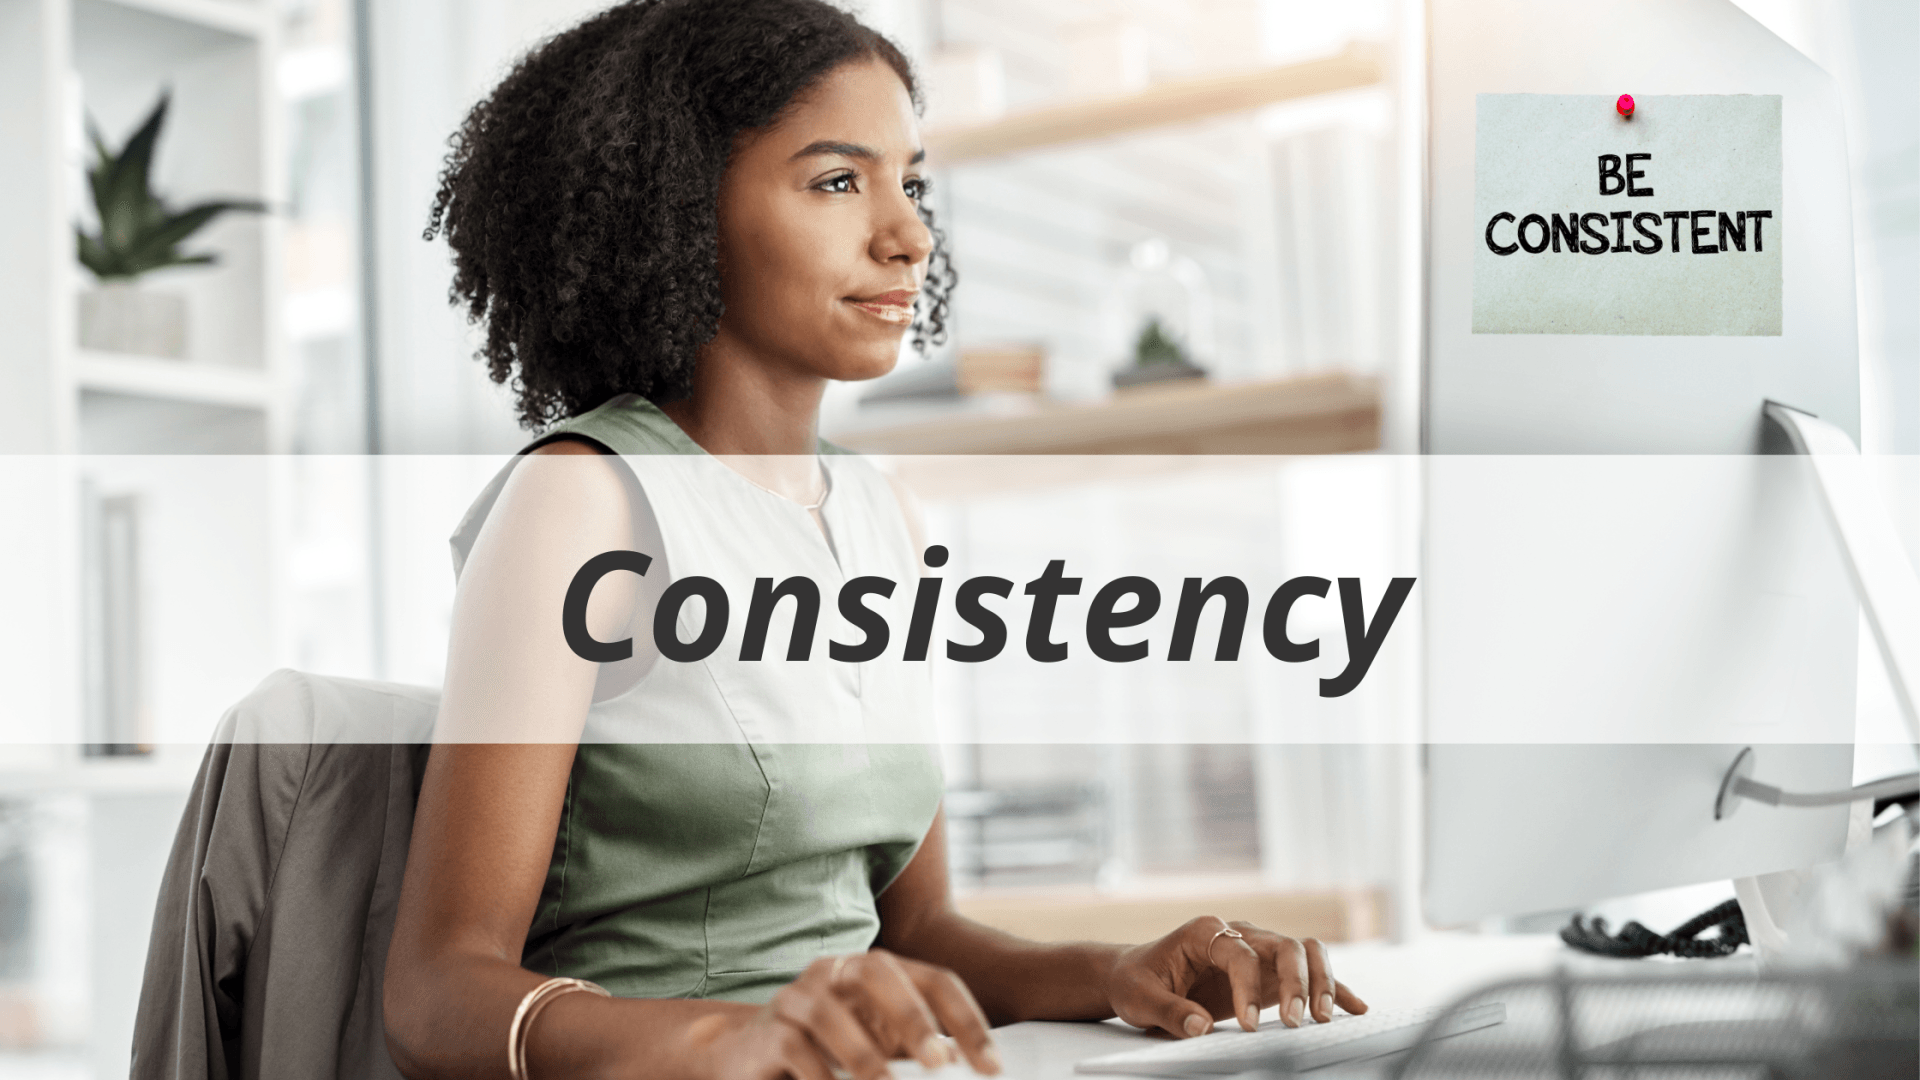 To be a successful freelancer, you must be consistent